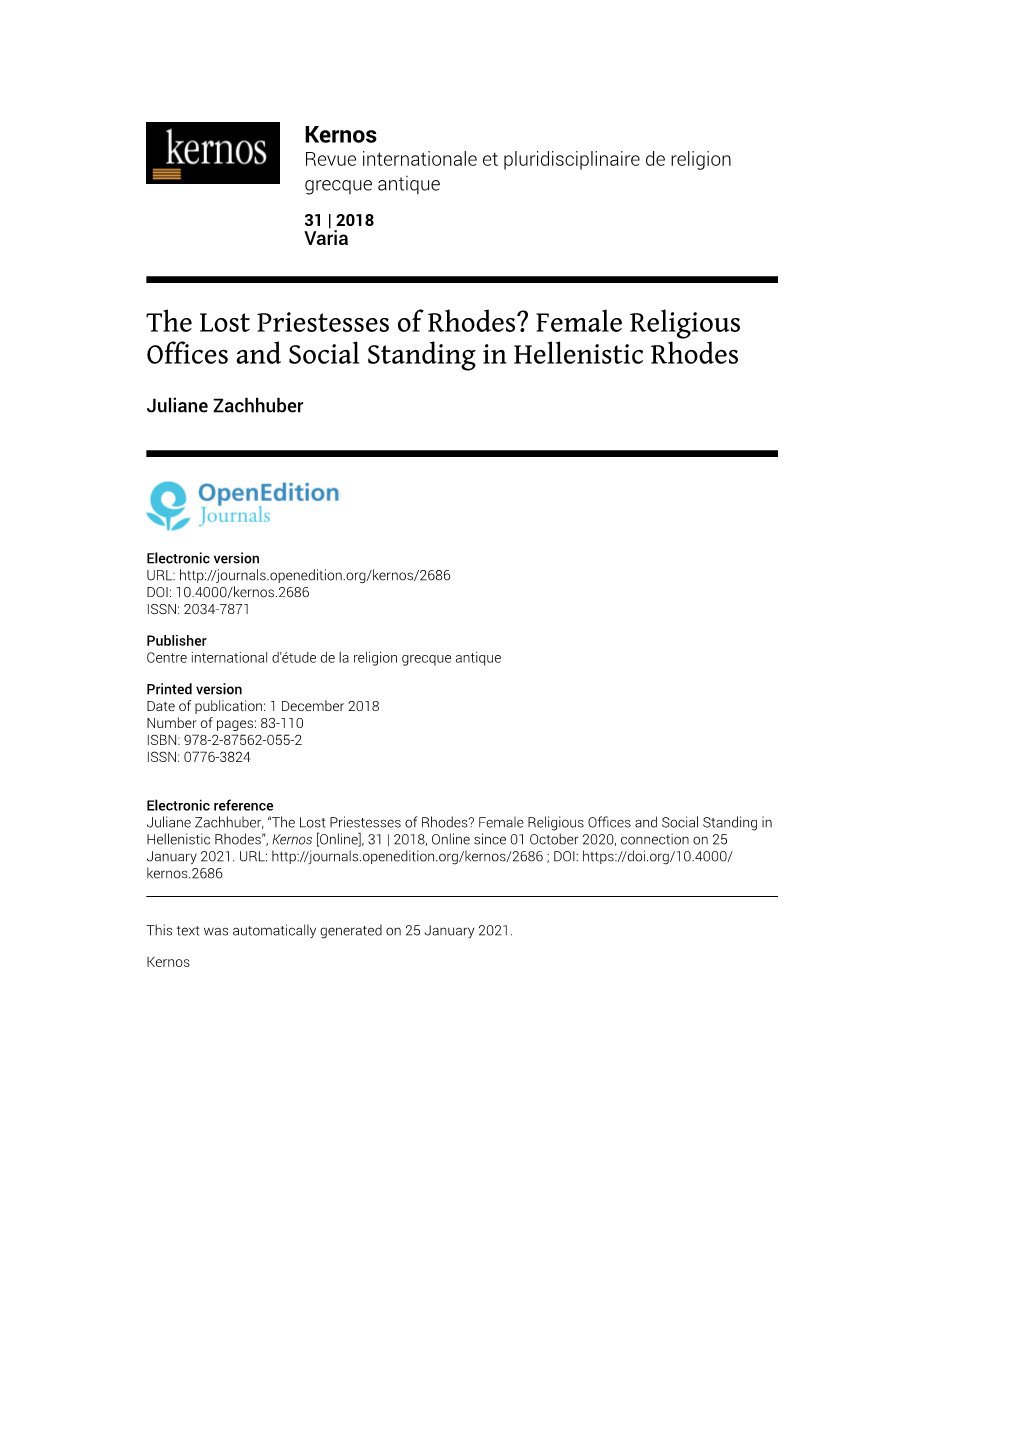 Female Religious Offices and Social Standing in Hellenistic Rhodes